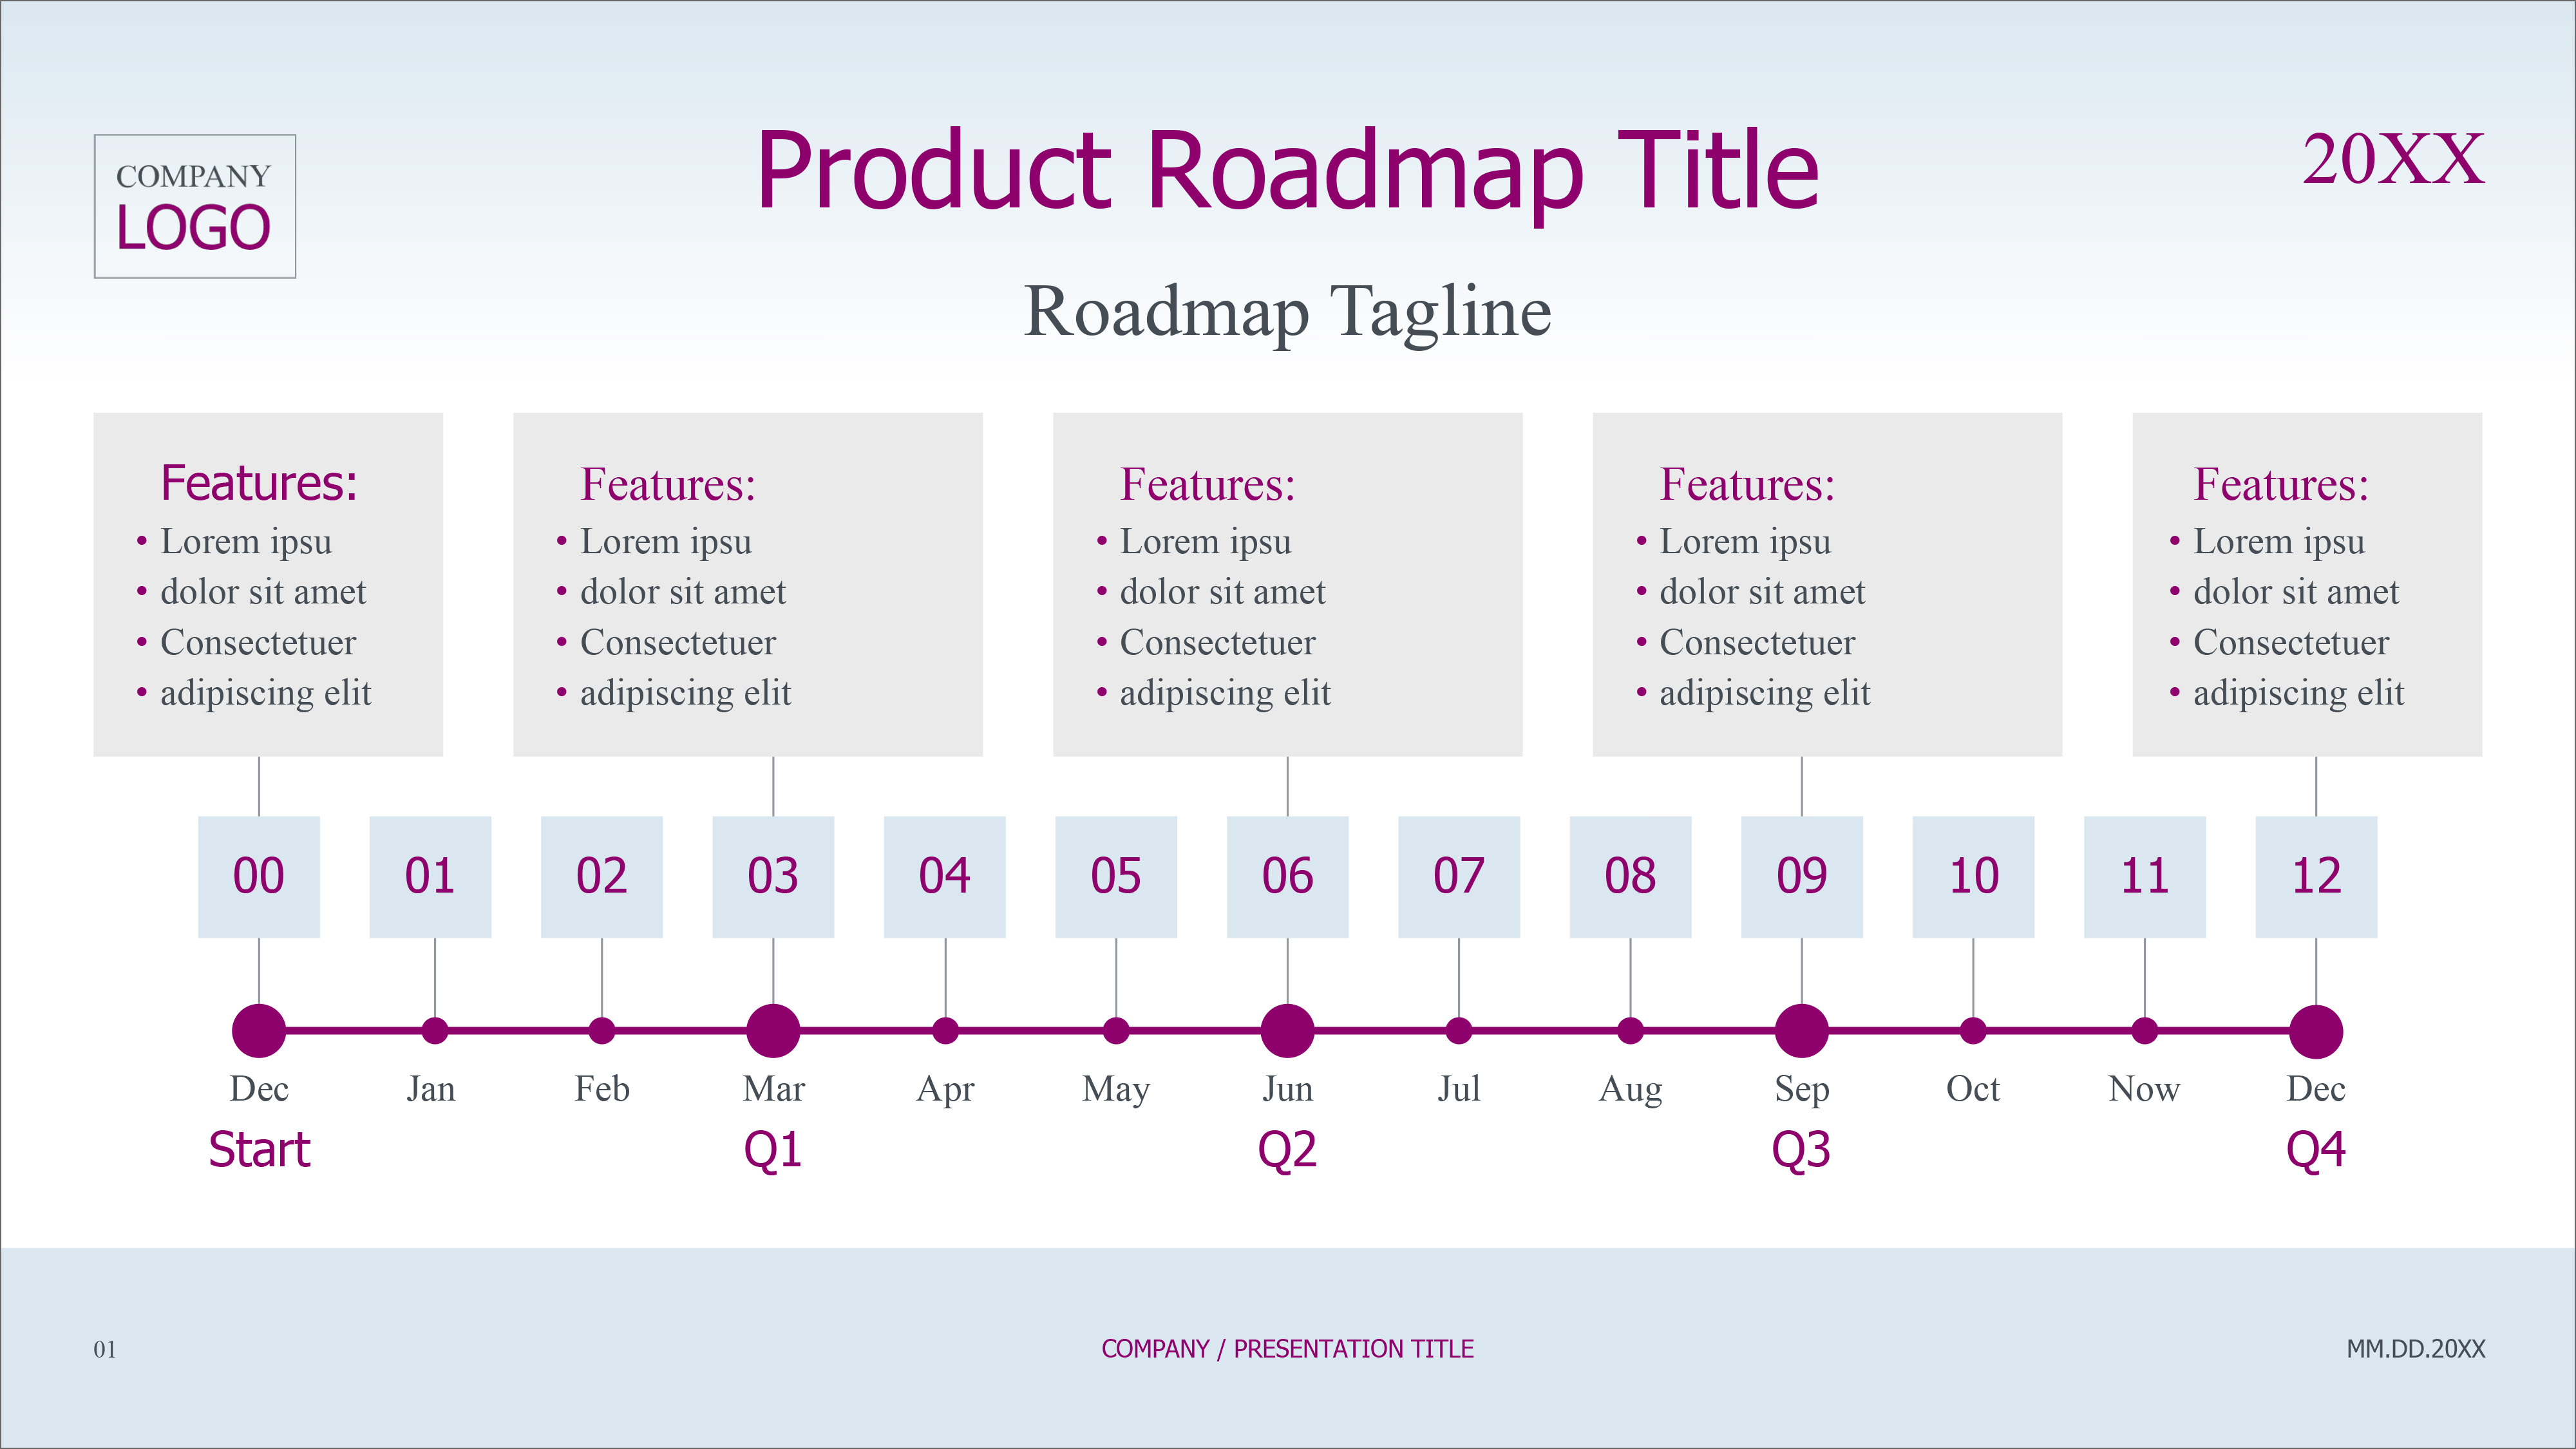 timeline templates office